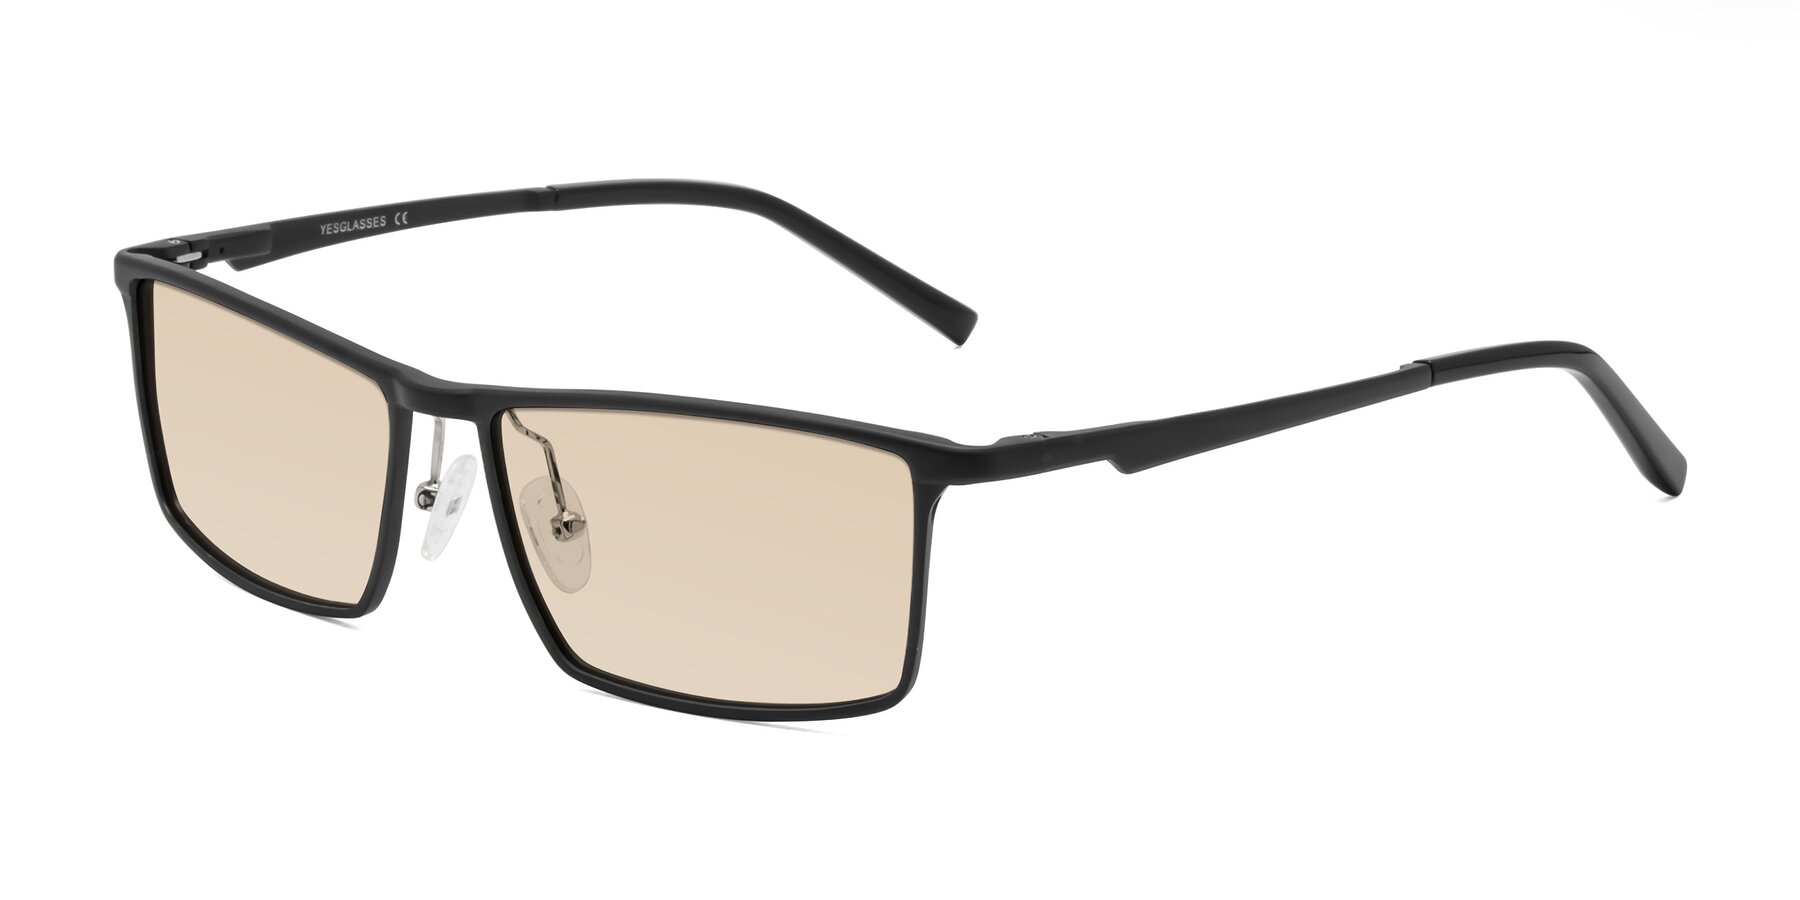 Angle of CX6330 in Black with Light Brown Tinted Lenses